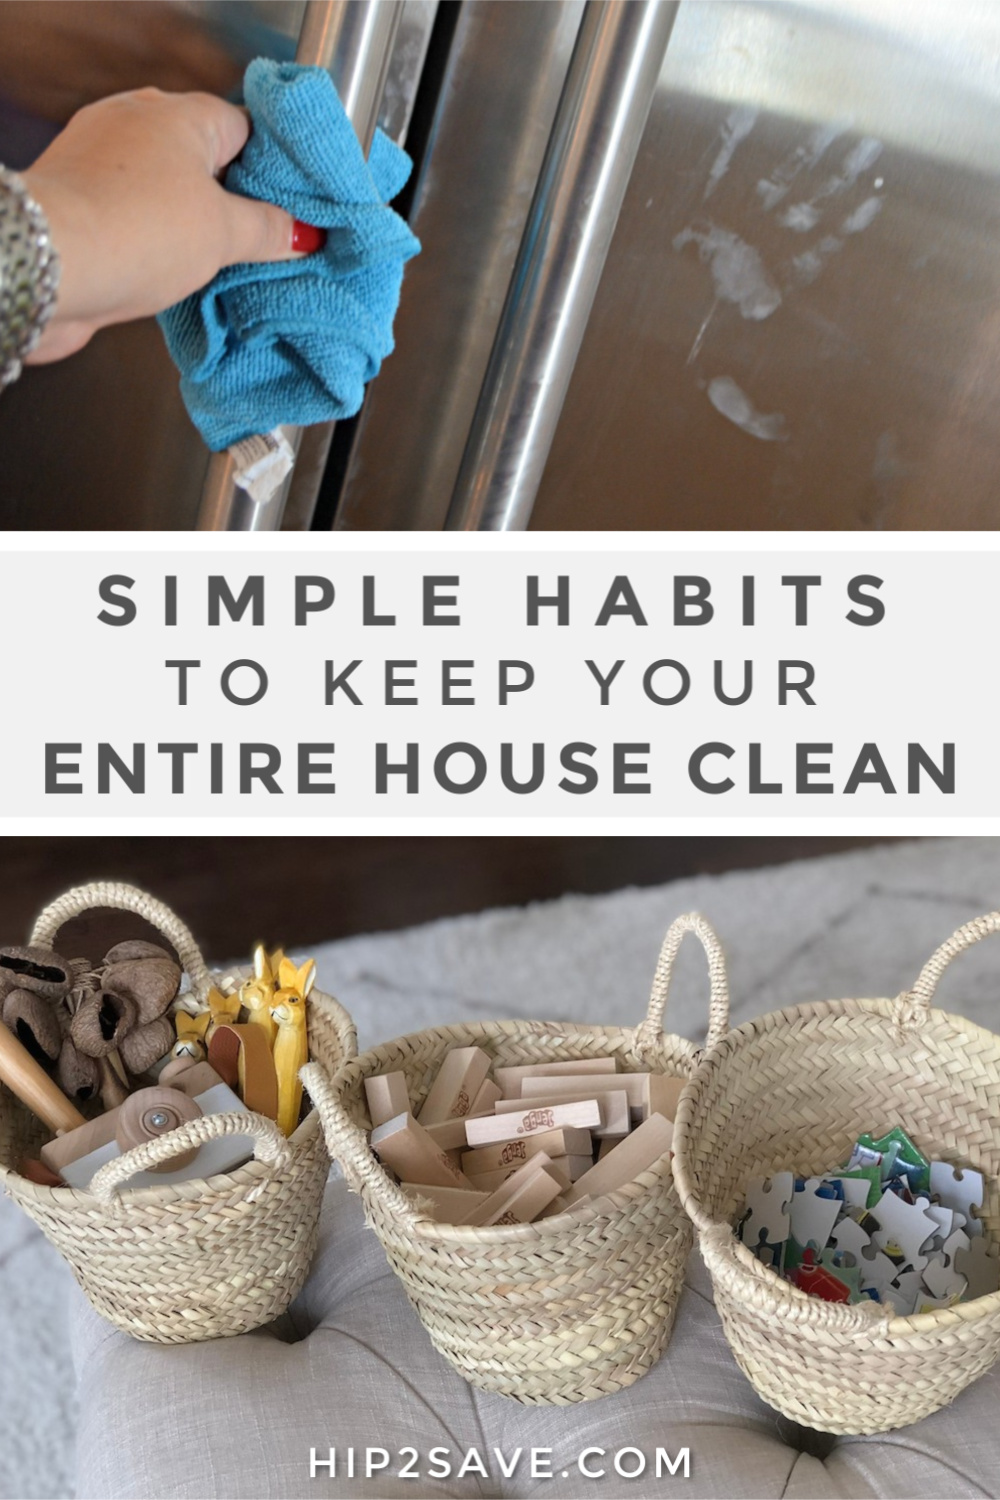 https://hip2save.com/wp-content/uploads/2019/06/keeping-home-clean-tips-pinterest.jpg?fit=1000%2C1500&strip=all